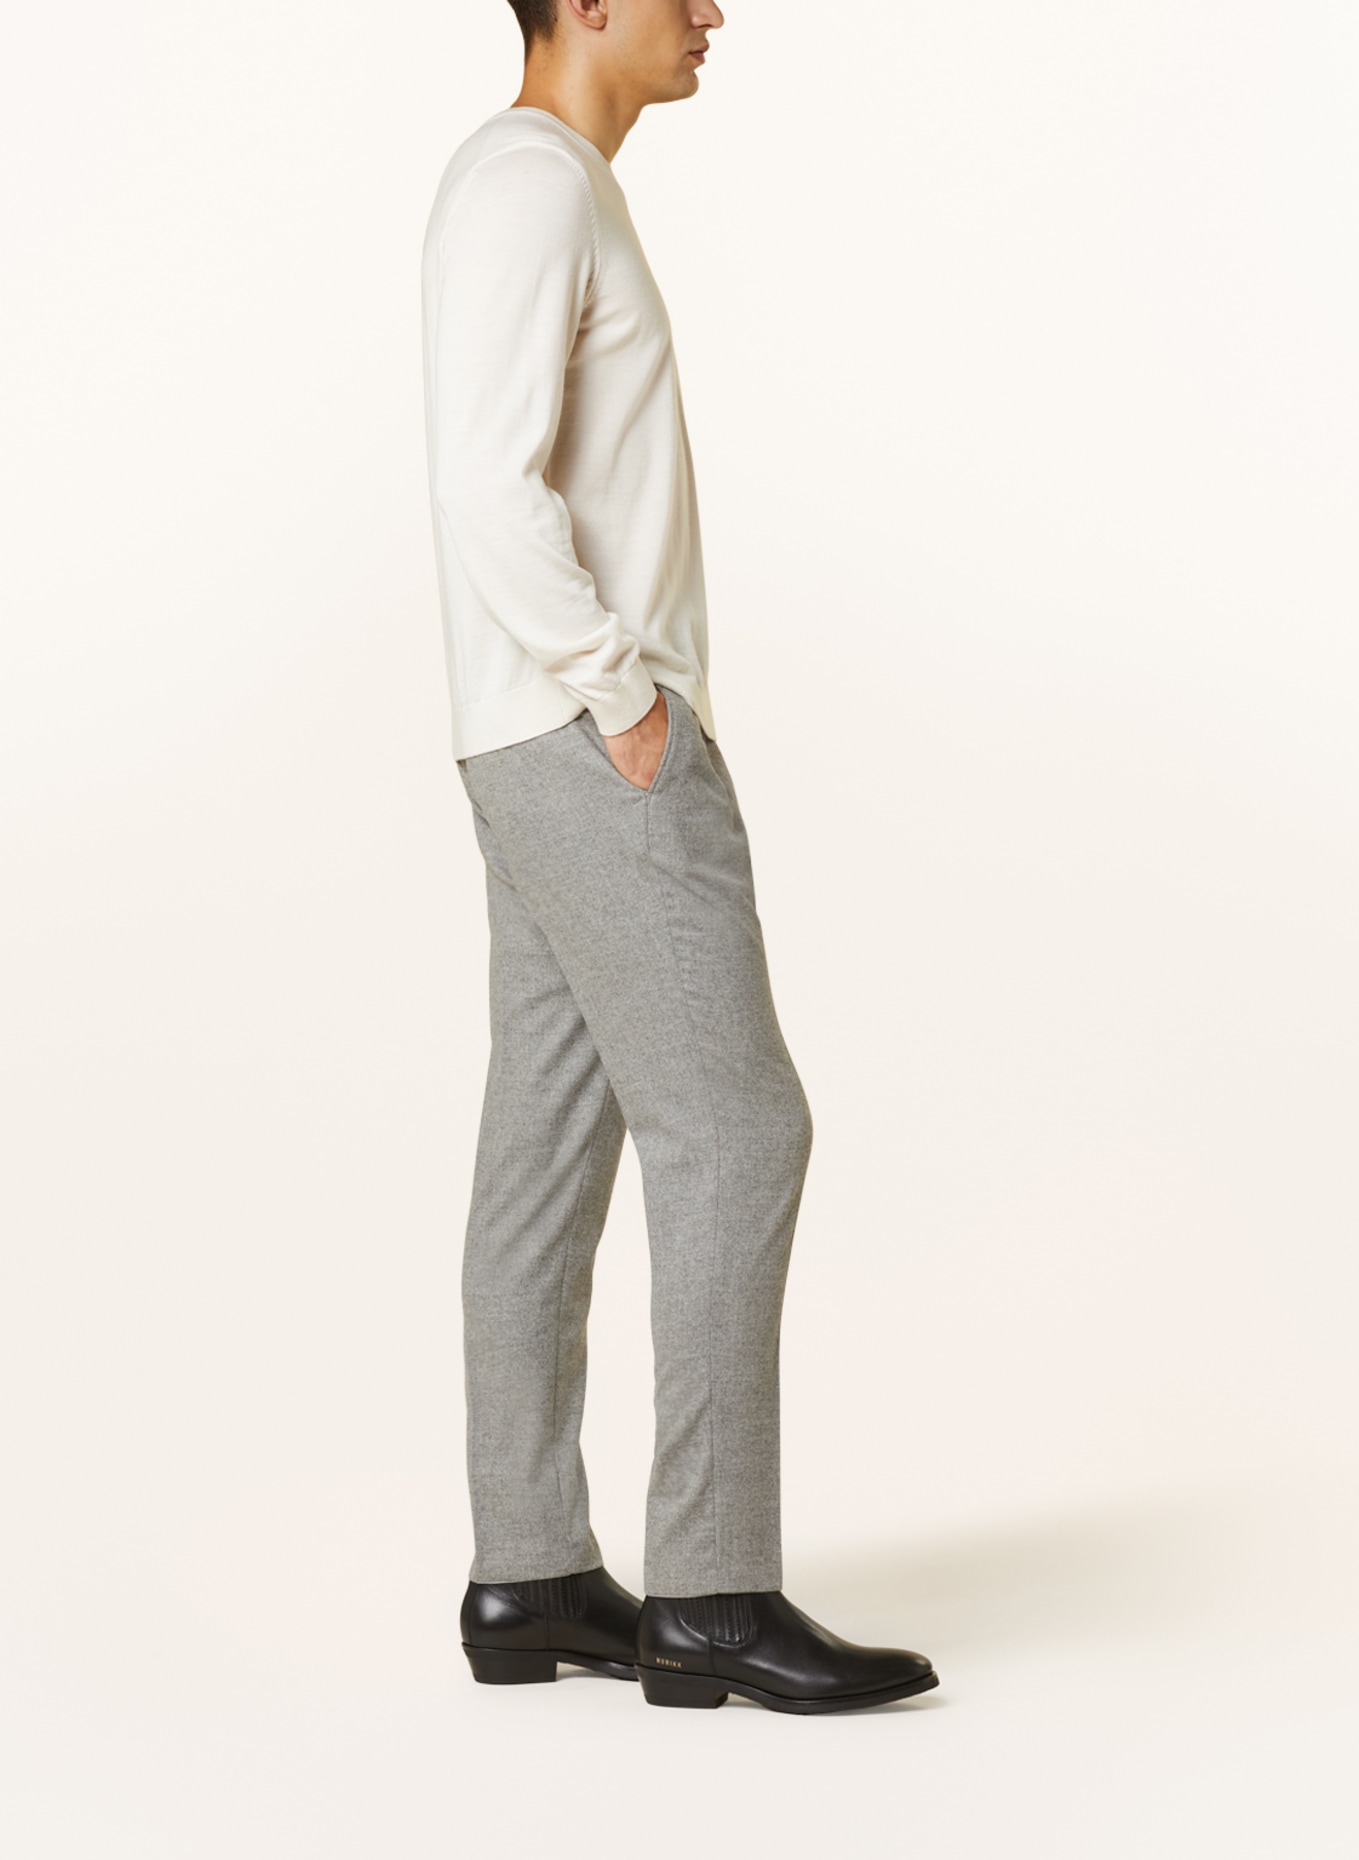 CG - CLUB of GENTS Suit trousers CG CHAS extra slim fit, Color: 81 grau hell (Image 5)